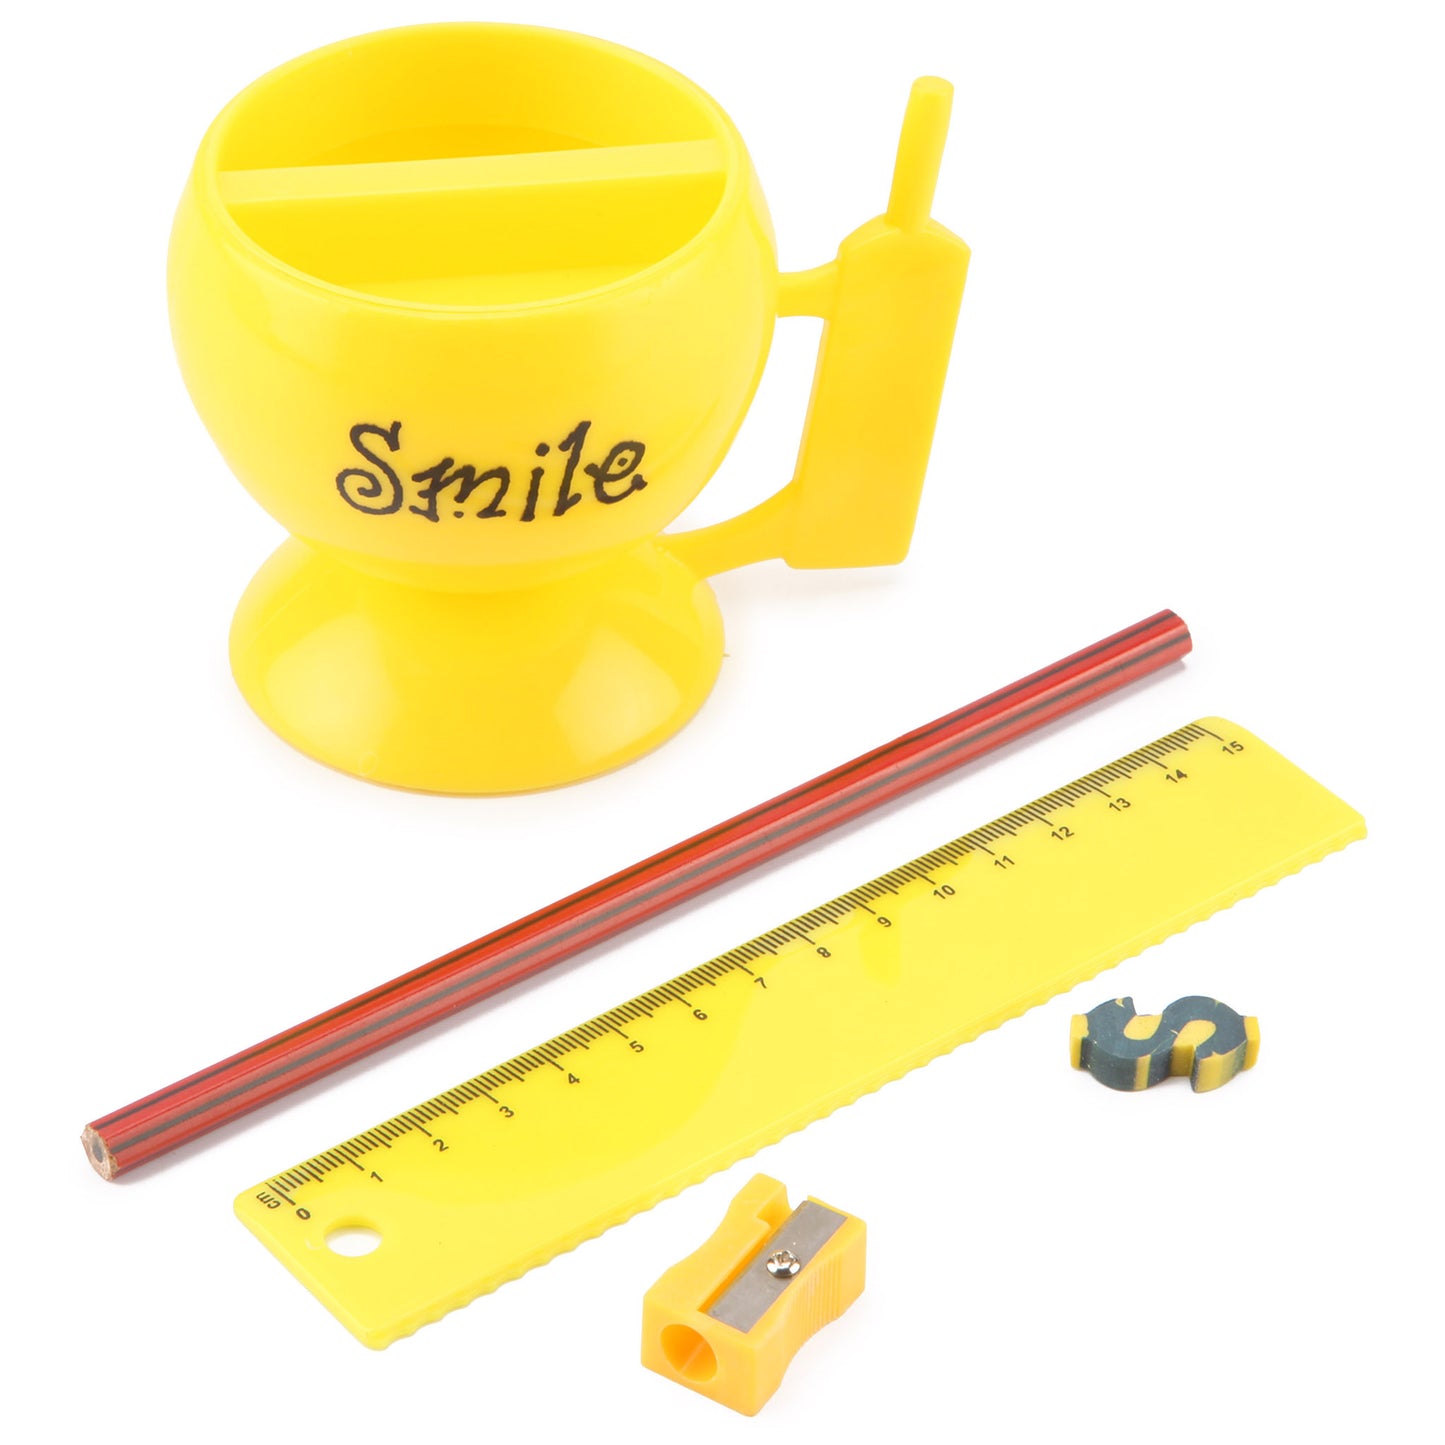 Smile Cup Stationery Kit